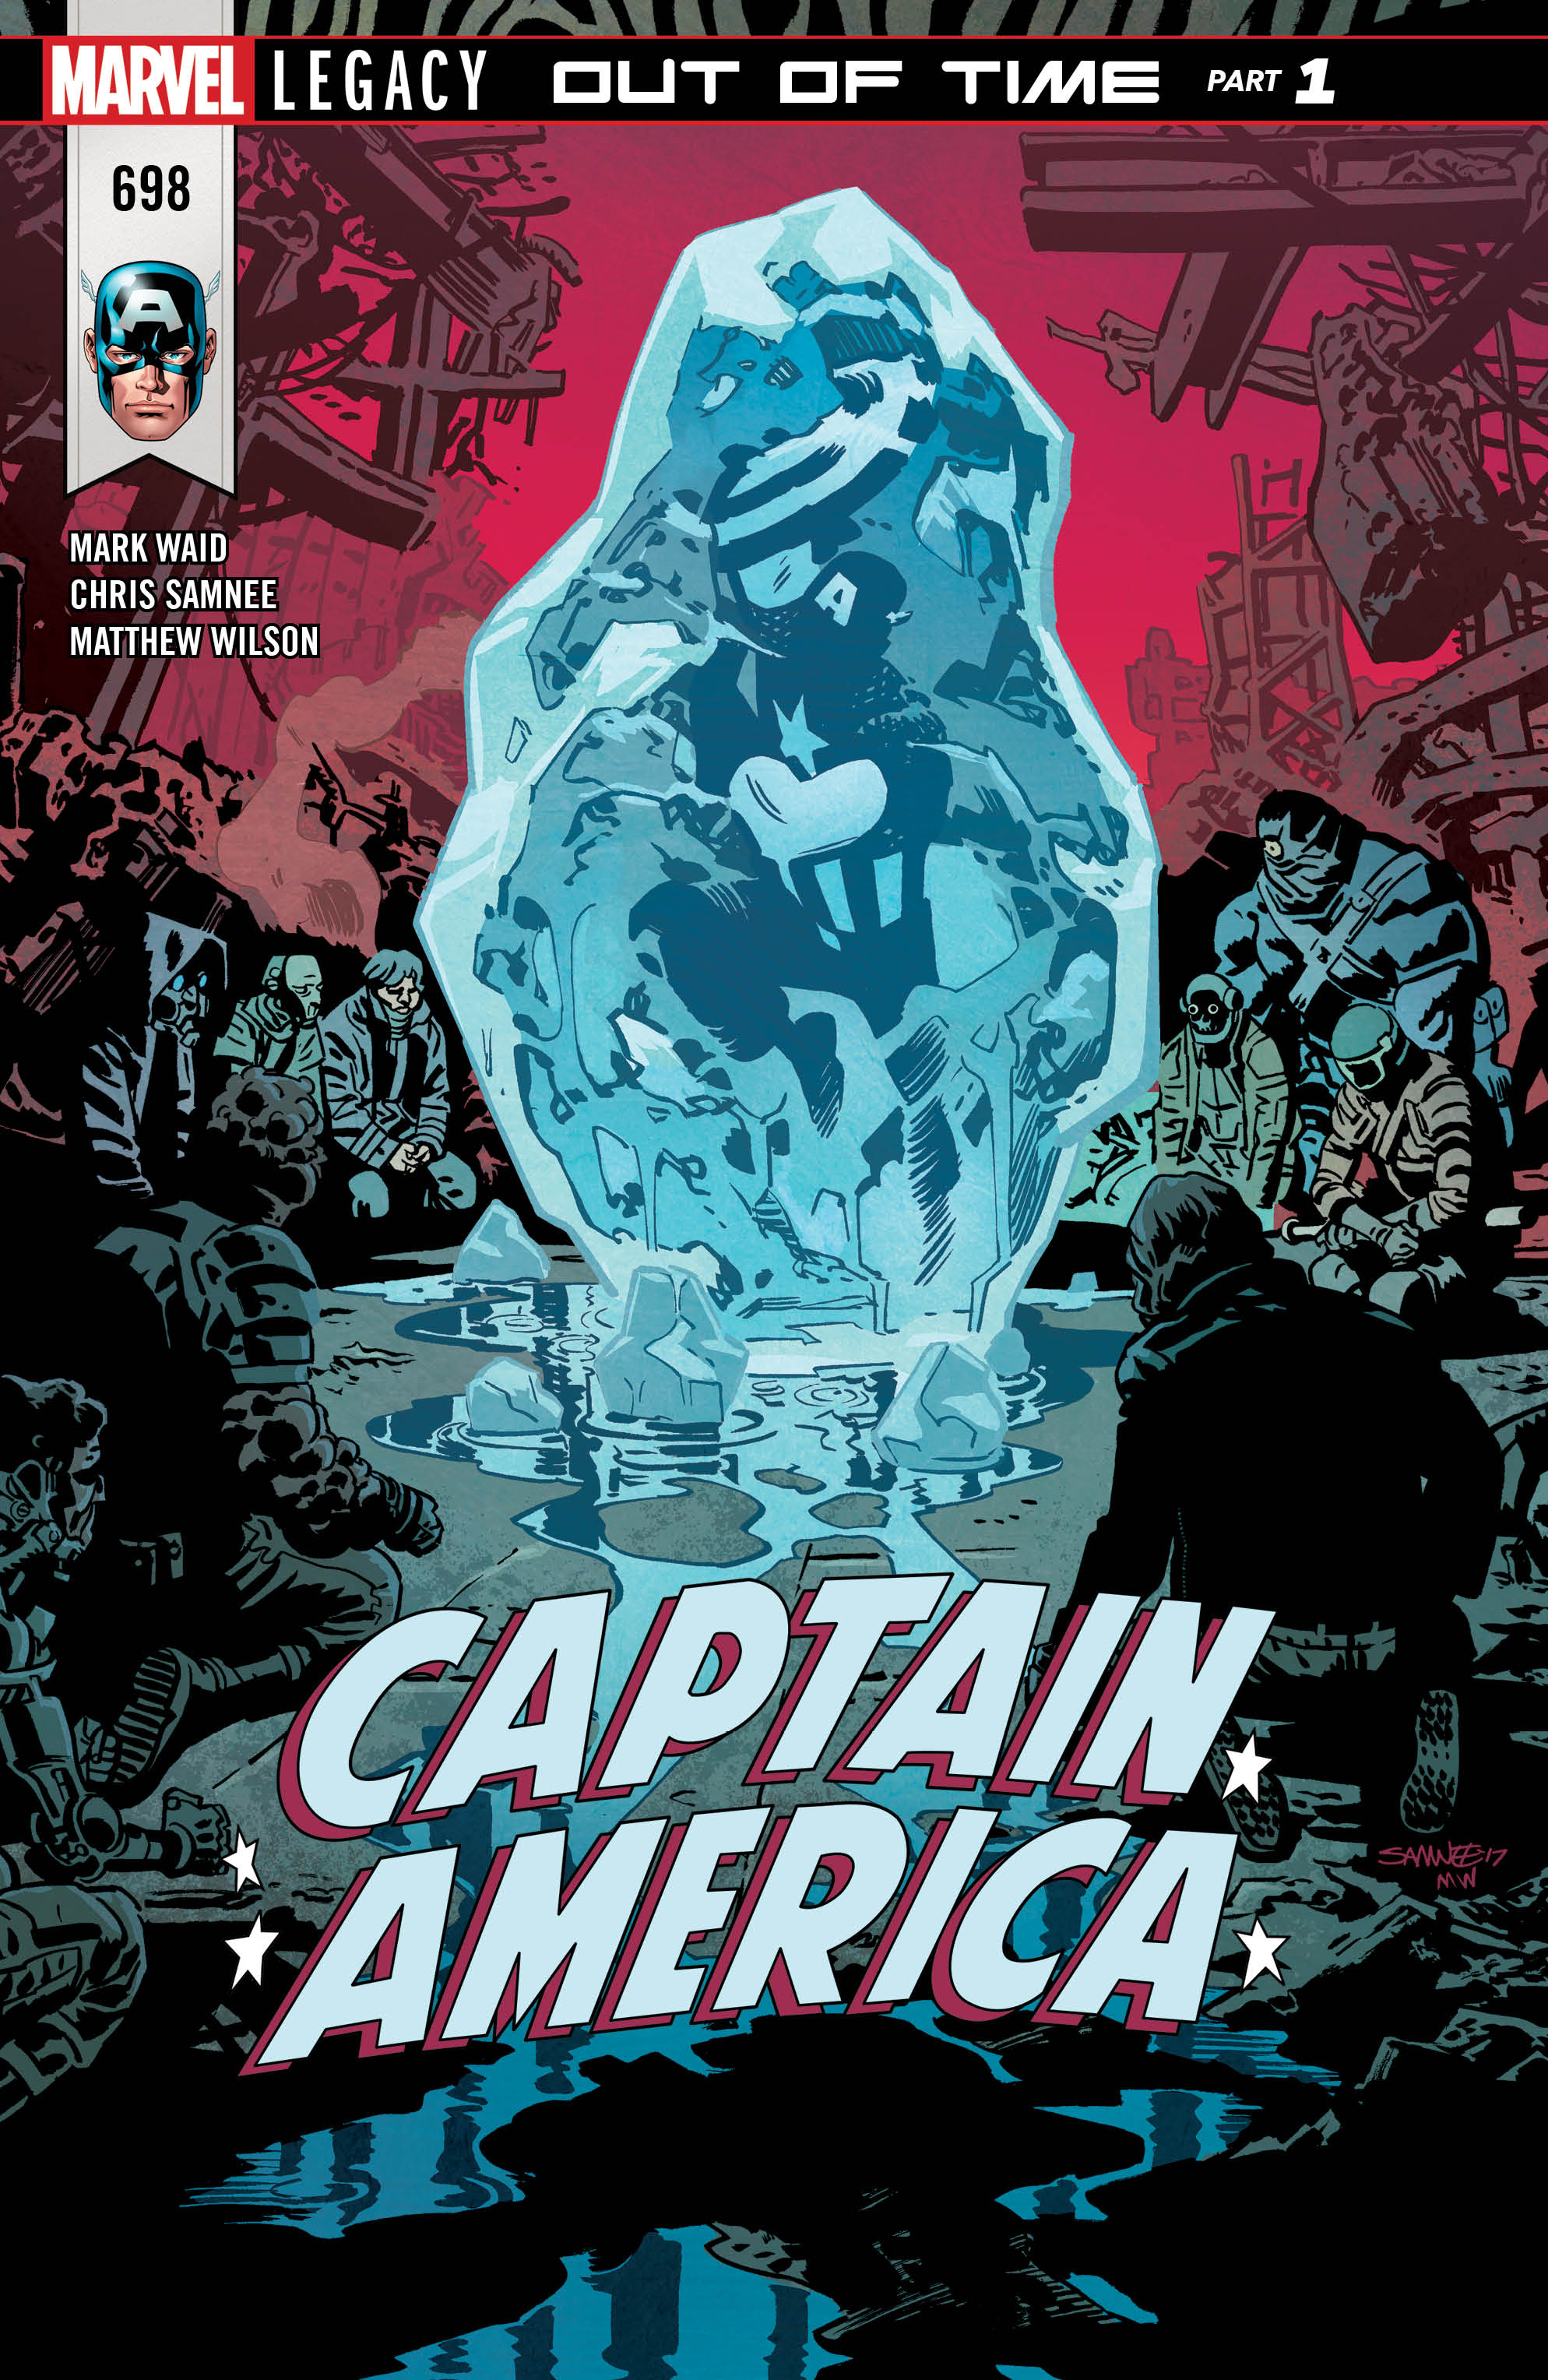 Marvel Comics News Digest 11/20 – 11/24/17 Featuring Captain America and Wolverine